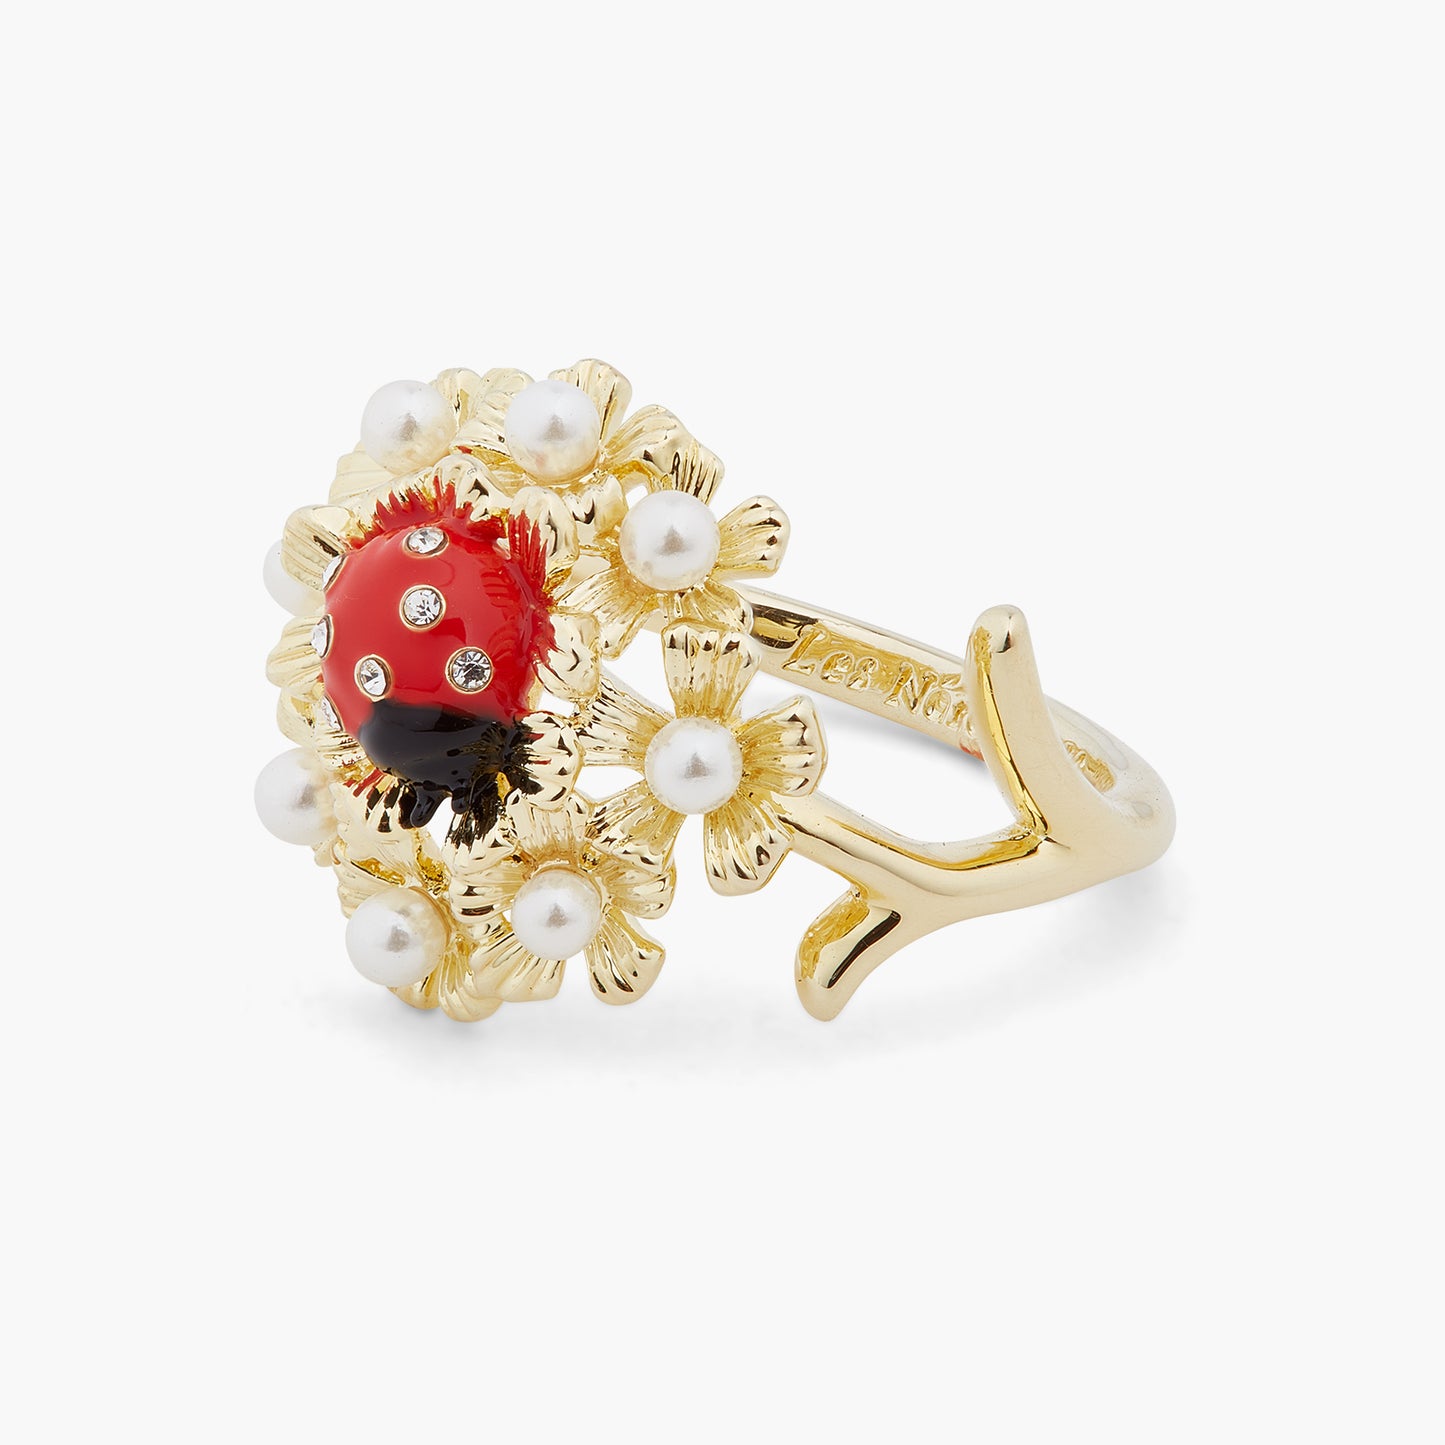 Ladybird And Wood Anemone Cocktail Ring | ARLP6021